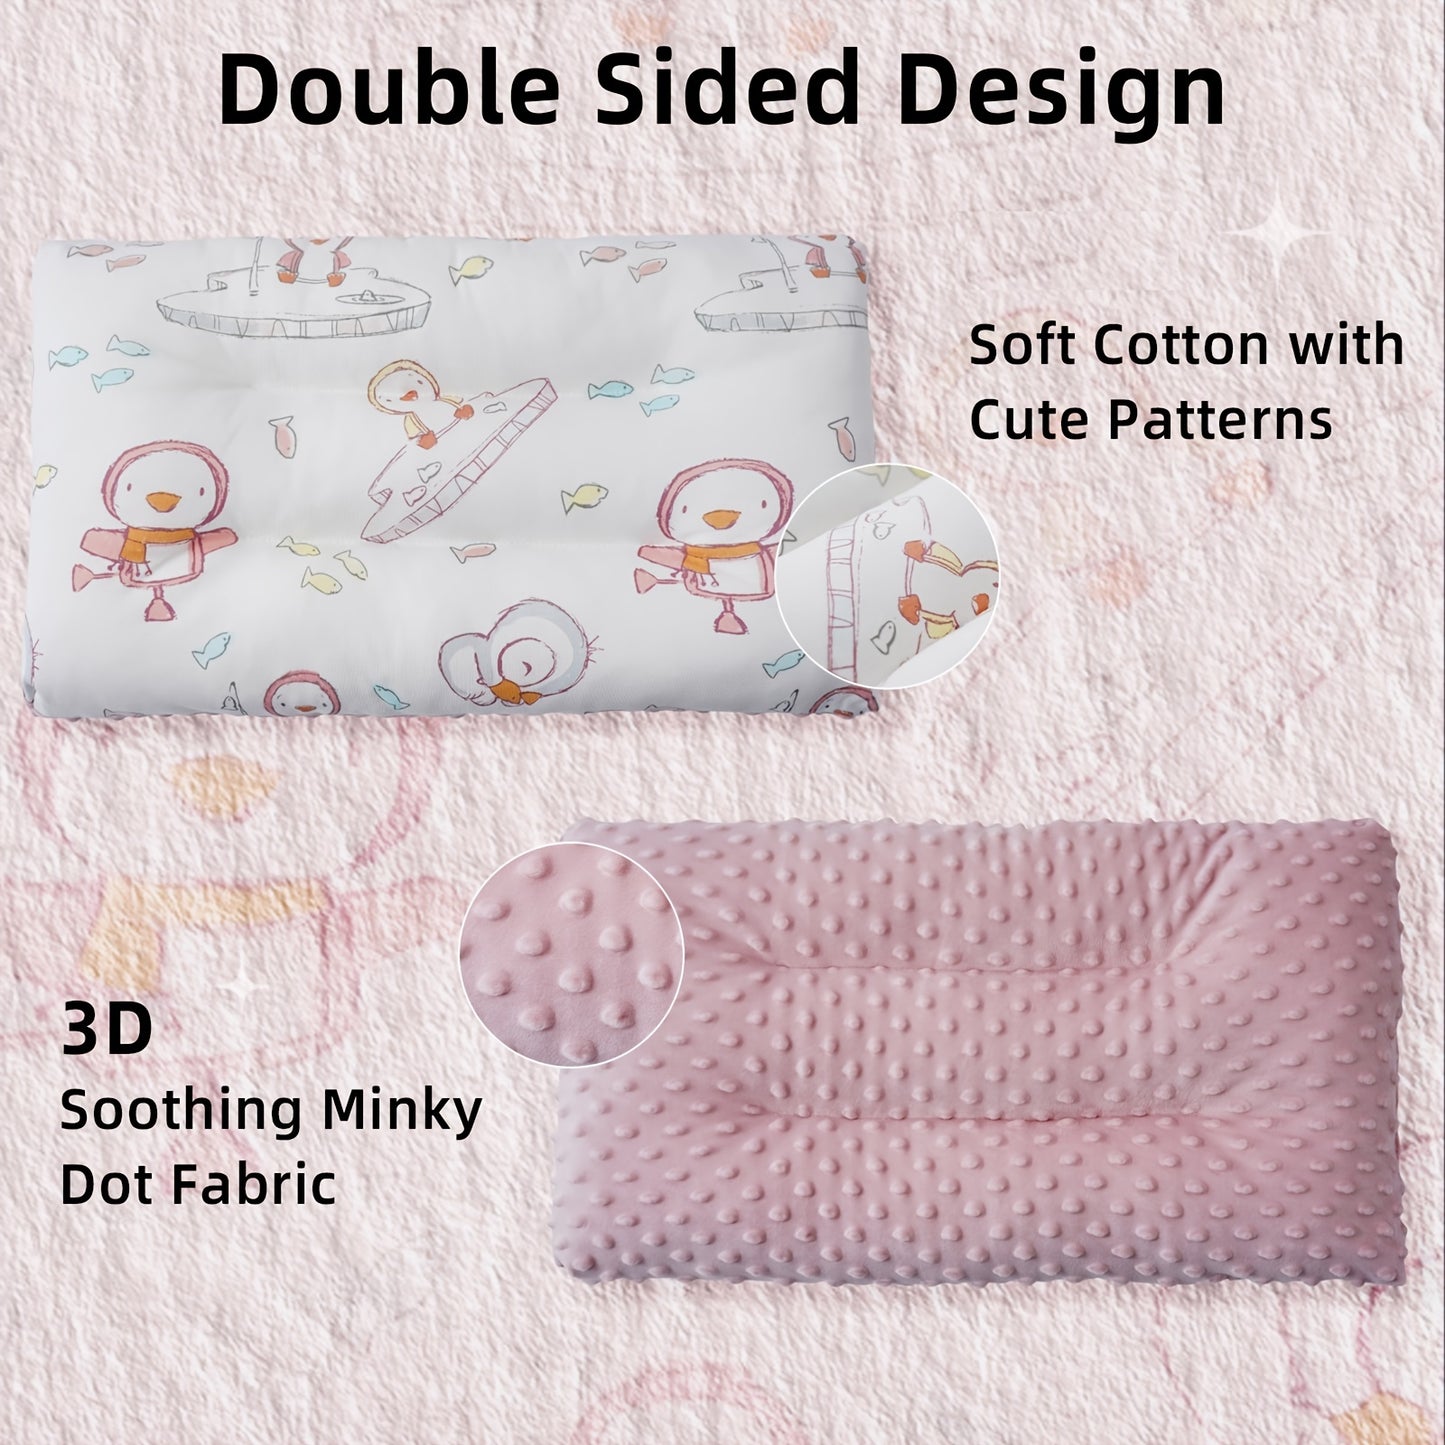 Children's Pillow Double Sided Cotton And Fabric Super Soft Baby Sleeping Pillowergonomically Designed Machine Washable